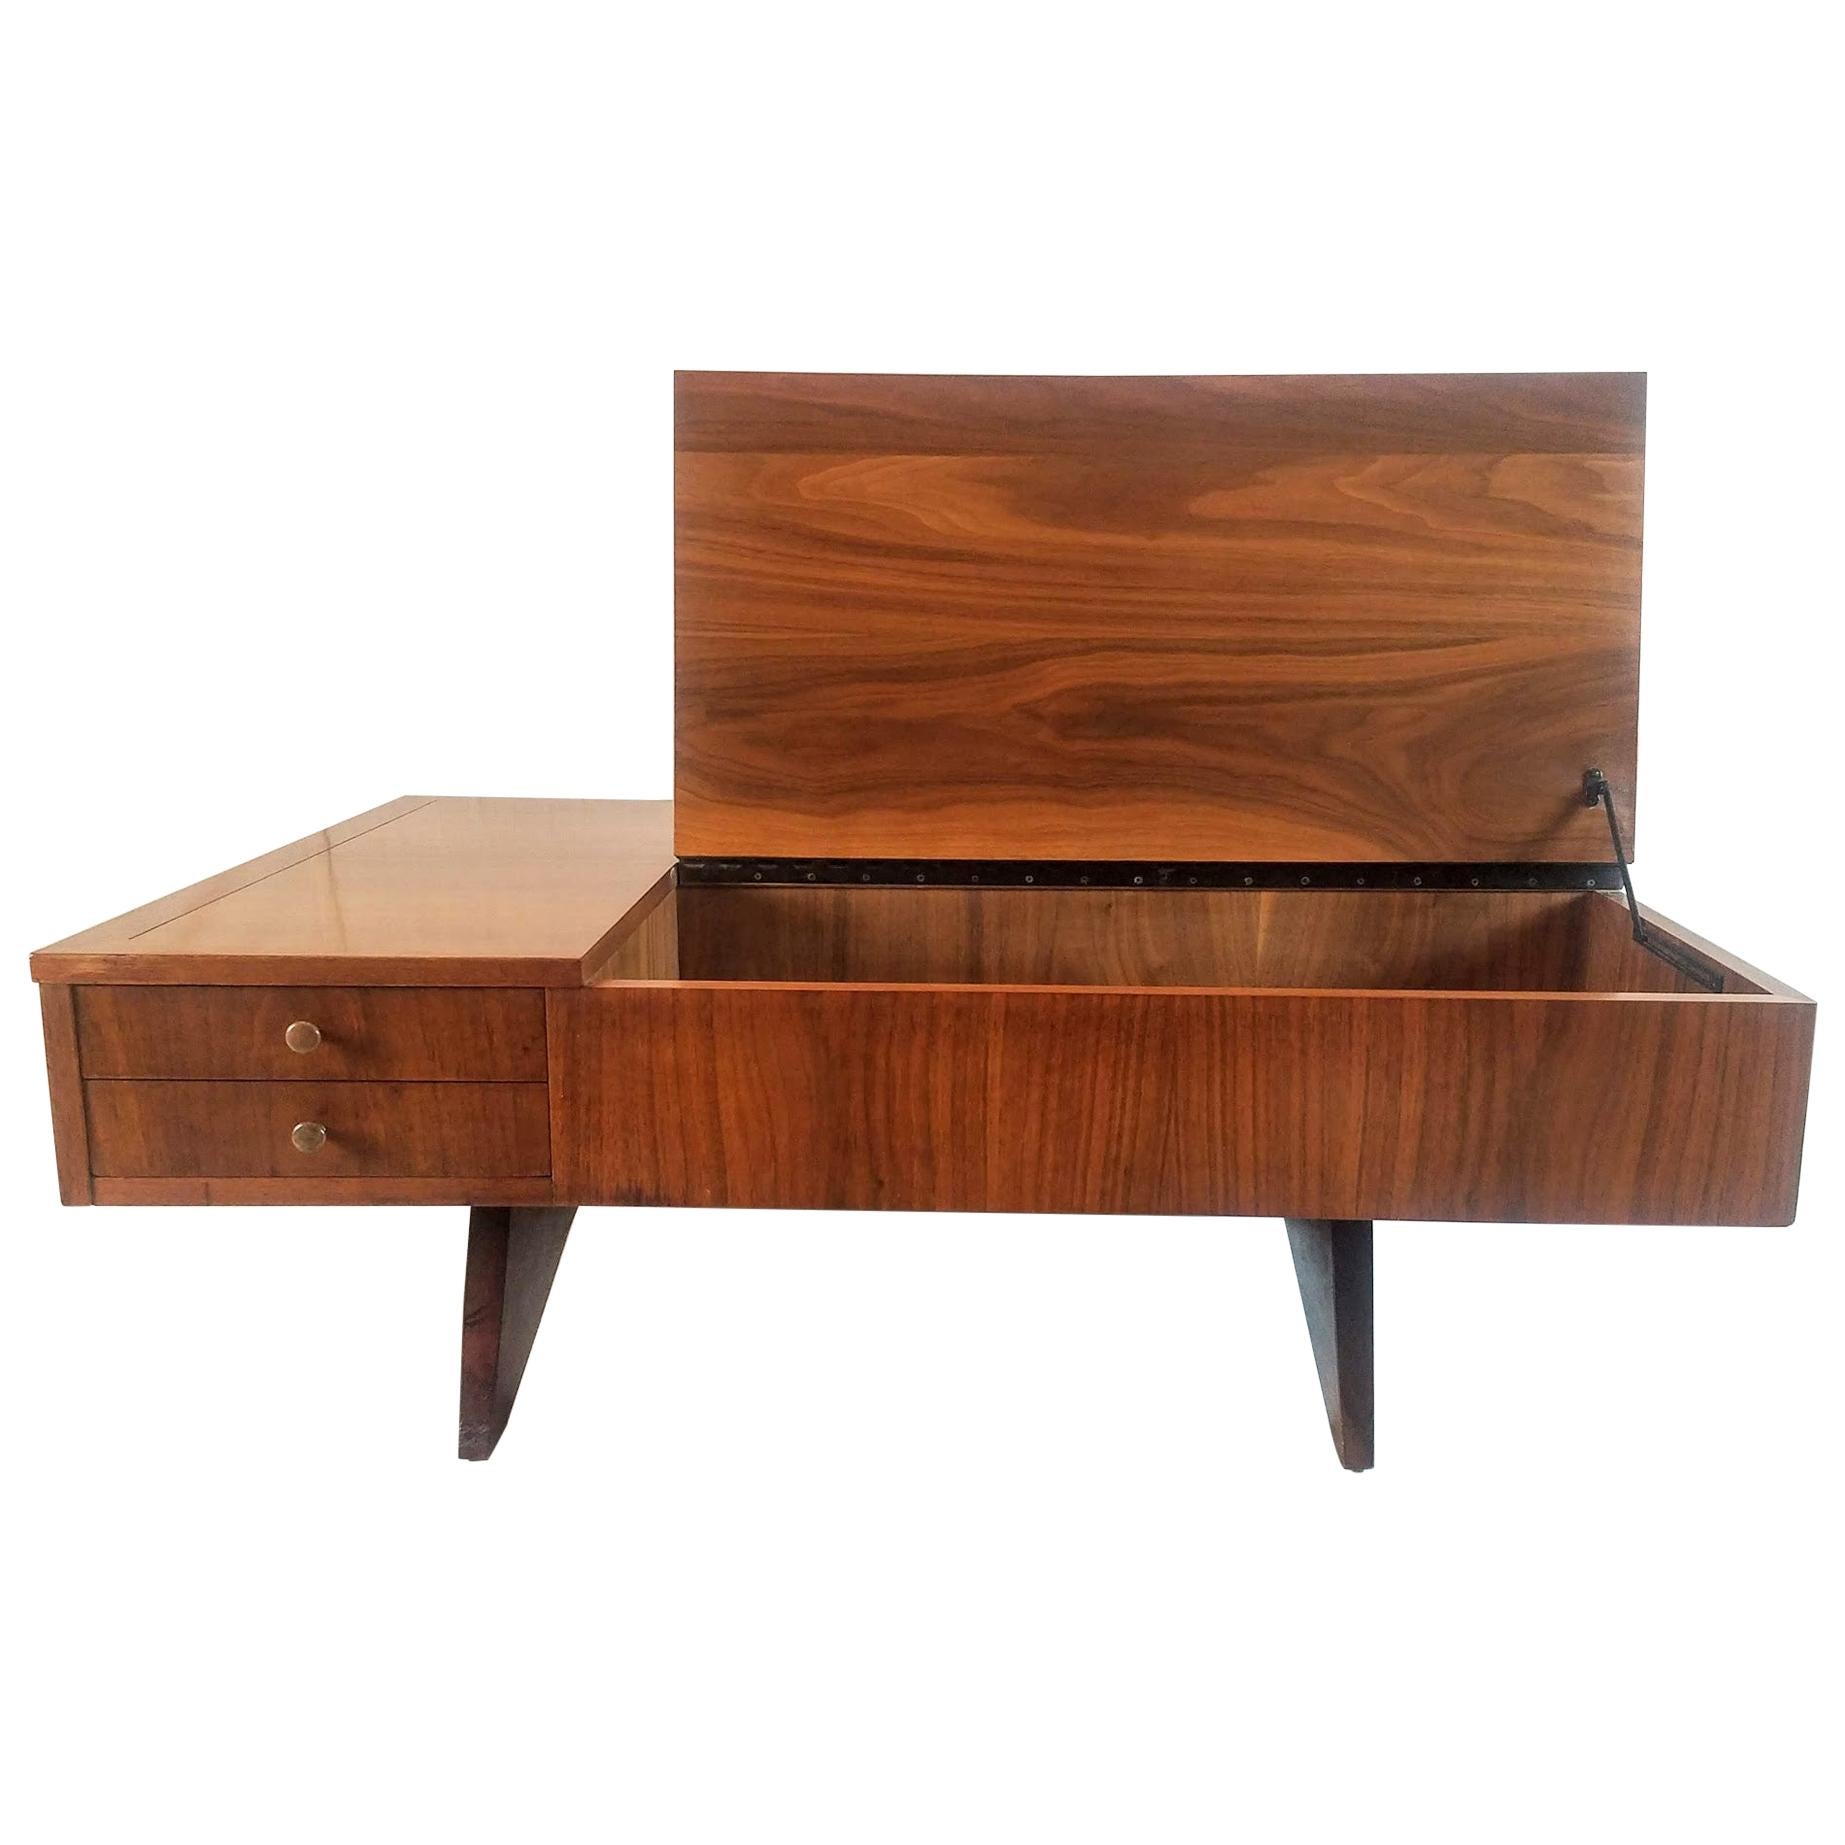 George Nakashima flip-top coffee table model 272 manufactured by Widdicomb in 1960 from his origins line.
The underside of the drawer is stenciled Sundra model 272 dated 1960.
The Origins line was only in production from 1958 until 1963 which is a